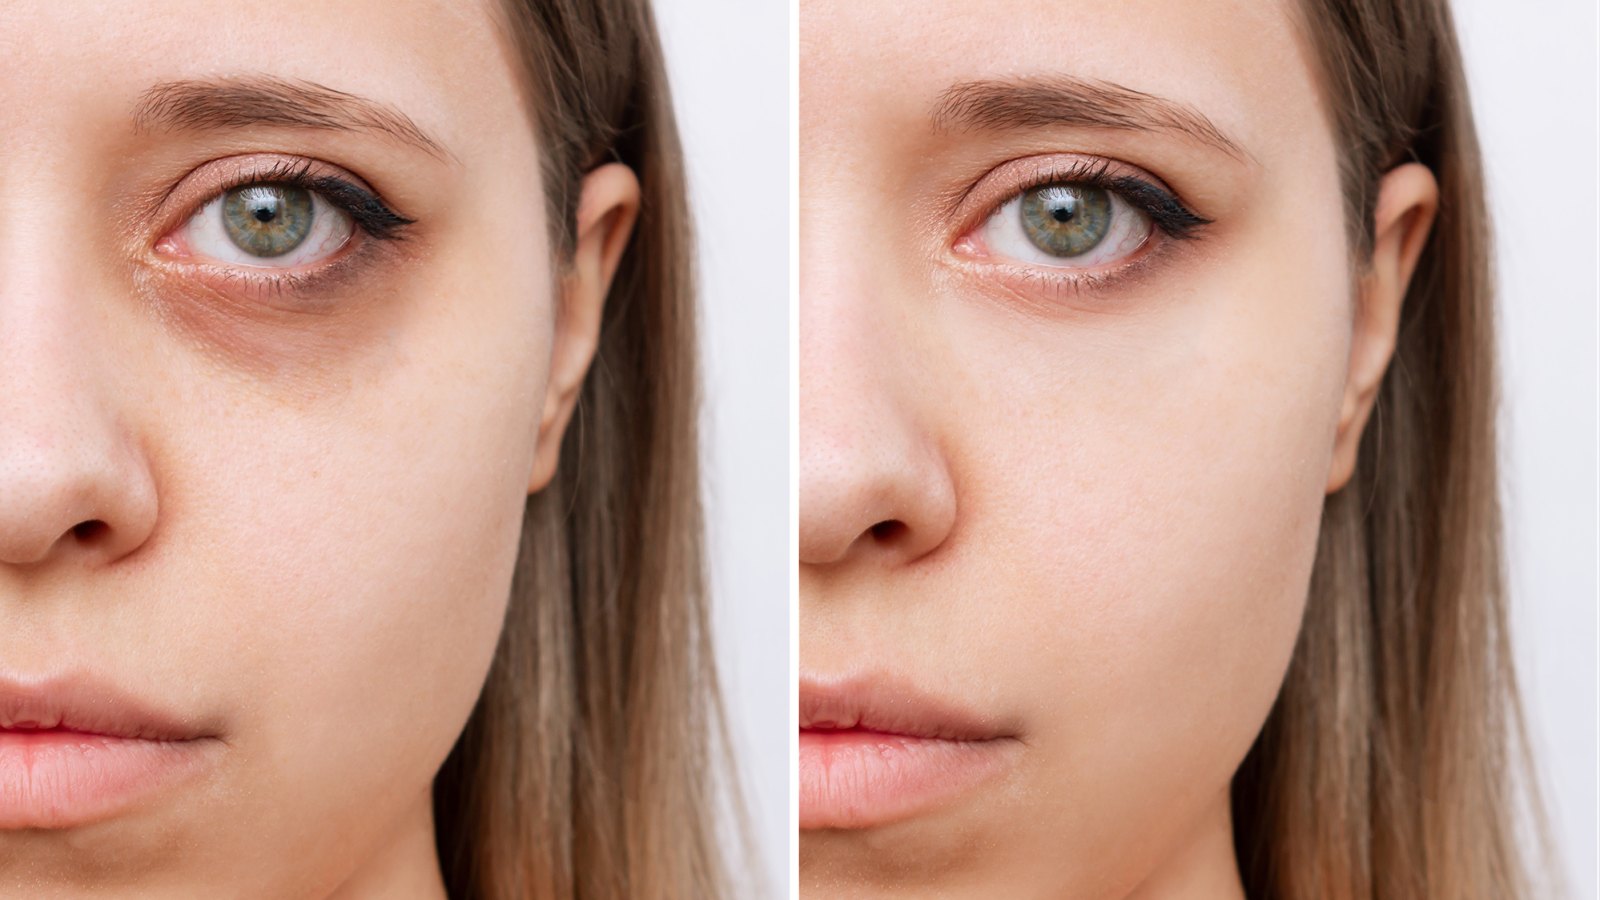 Cropped shot of young woman's face with dark circles under eyes before and after cosmetic treatment.